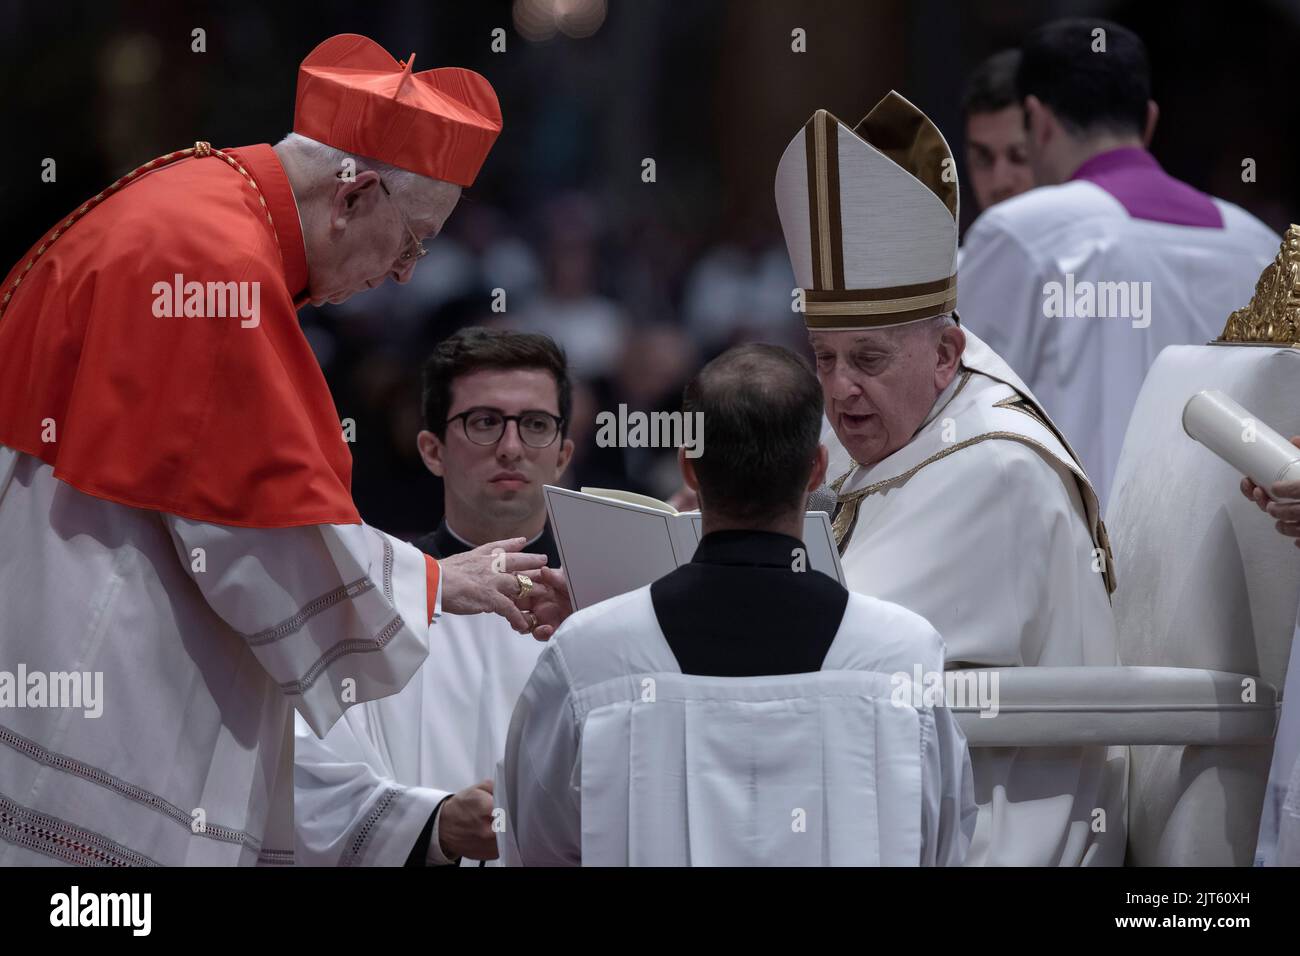 Vatican City, Vatican, 27 August 2022.   Newly appointed Cardinal Fernando Vergez Alzaga, L.C., emeritus archbishop of Villamagna,  receives the red hat, biretta, from Pope Francis during an extraordinary consistory for the creation of 21 Cardinals, in St. Peter's Basilica. Credit: Maria Grazia Picciarella/Alamy Live News Stock Photo